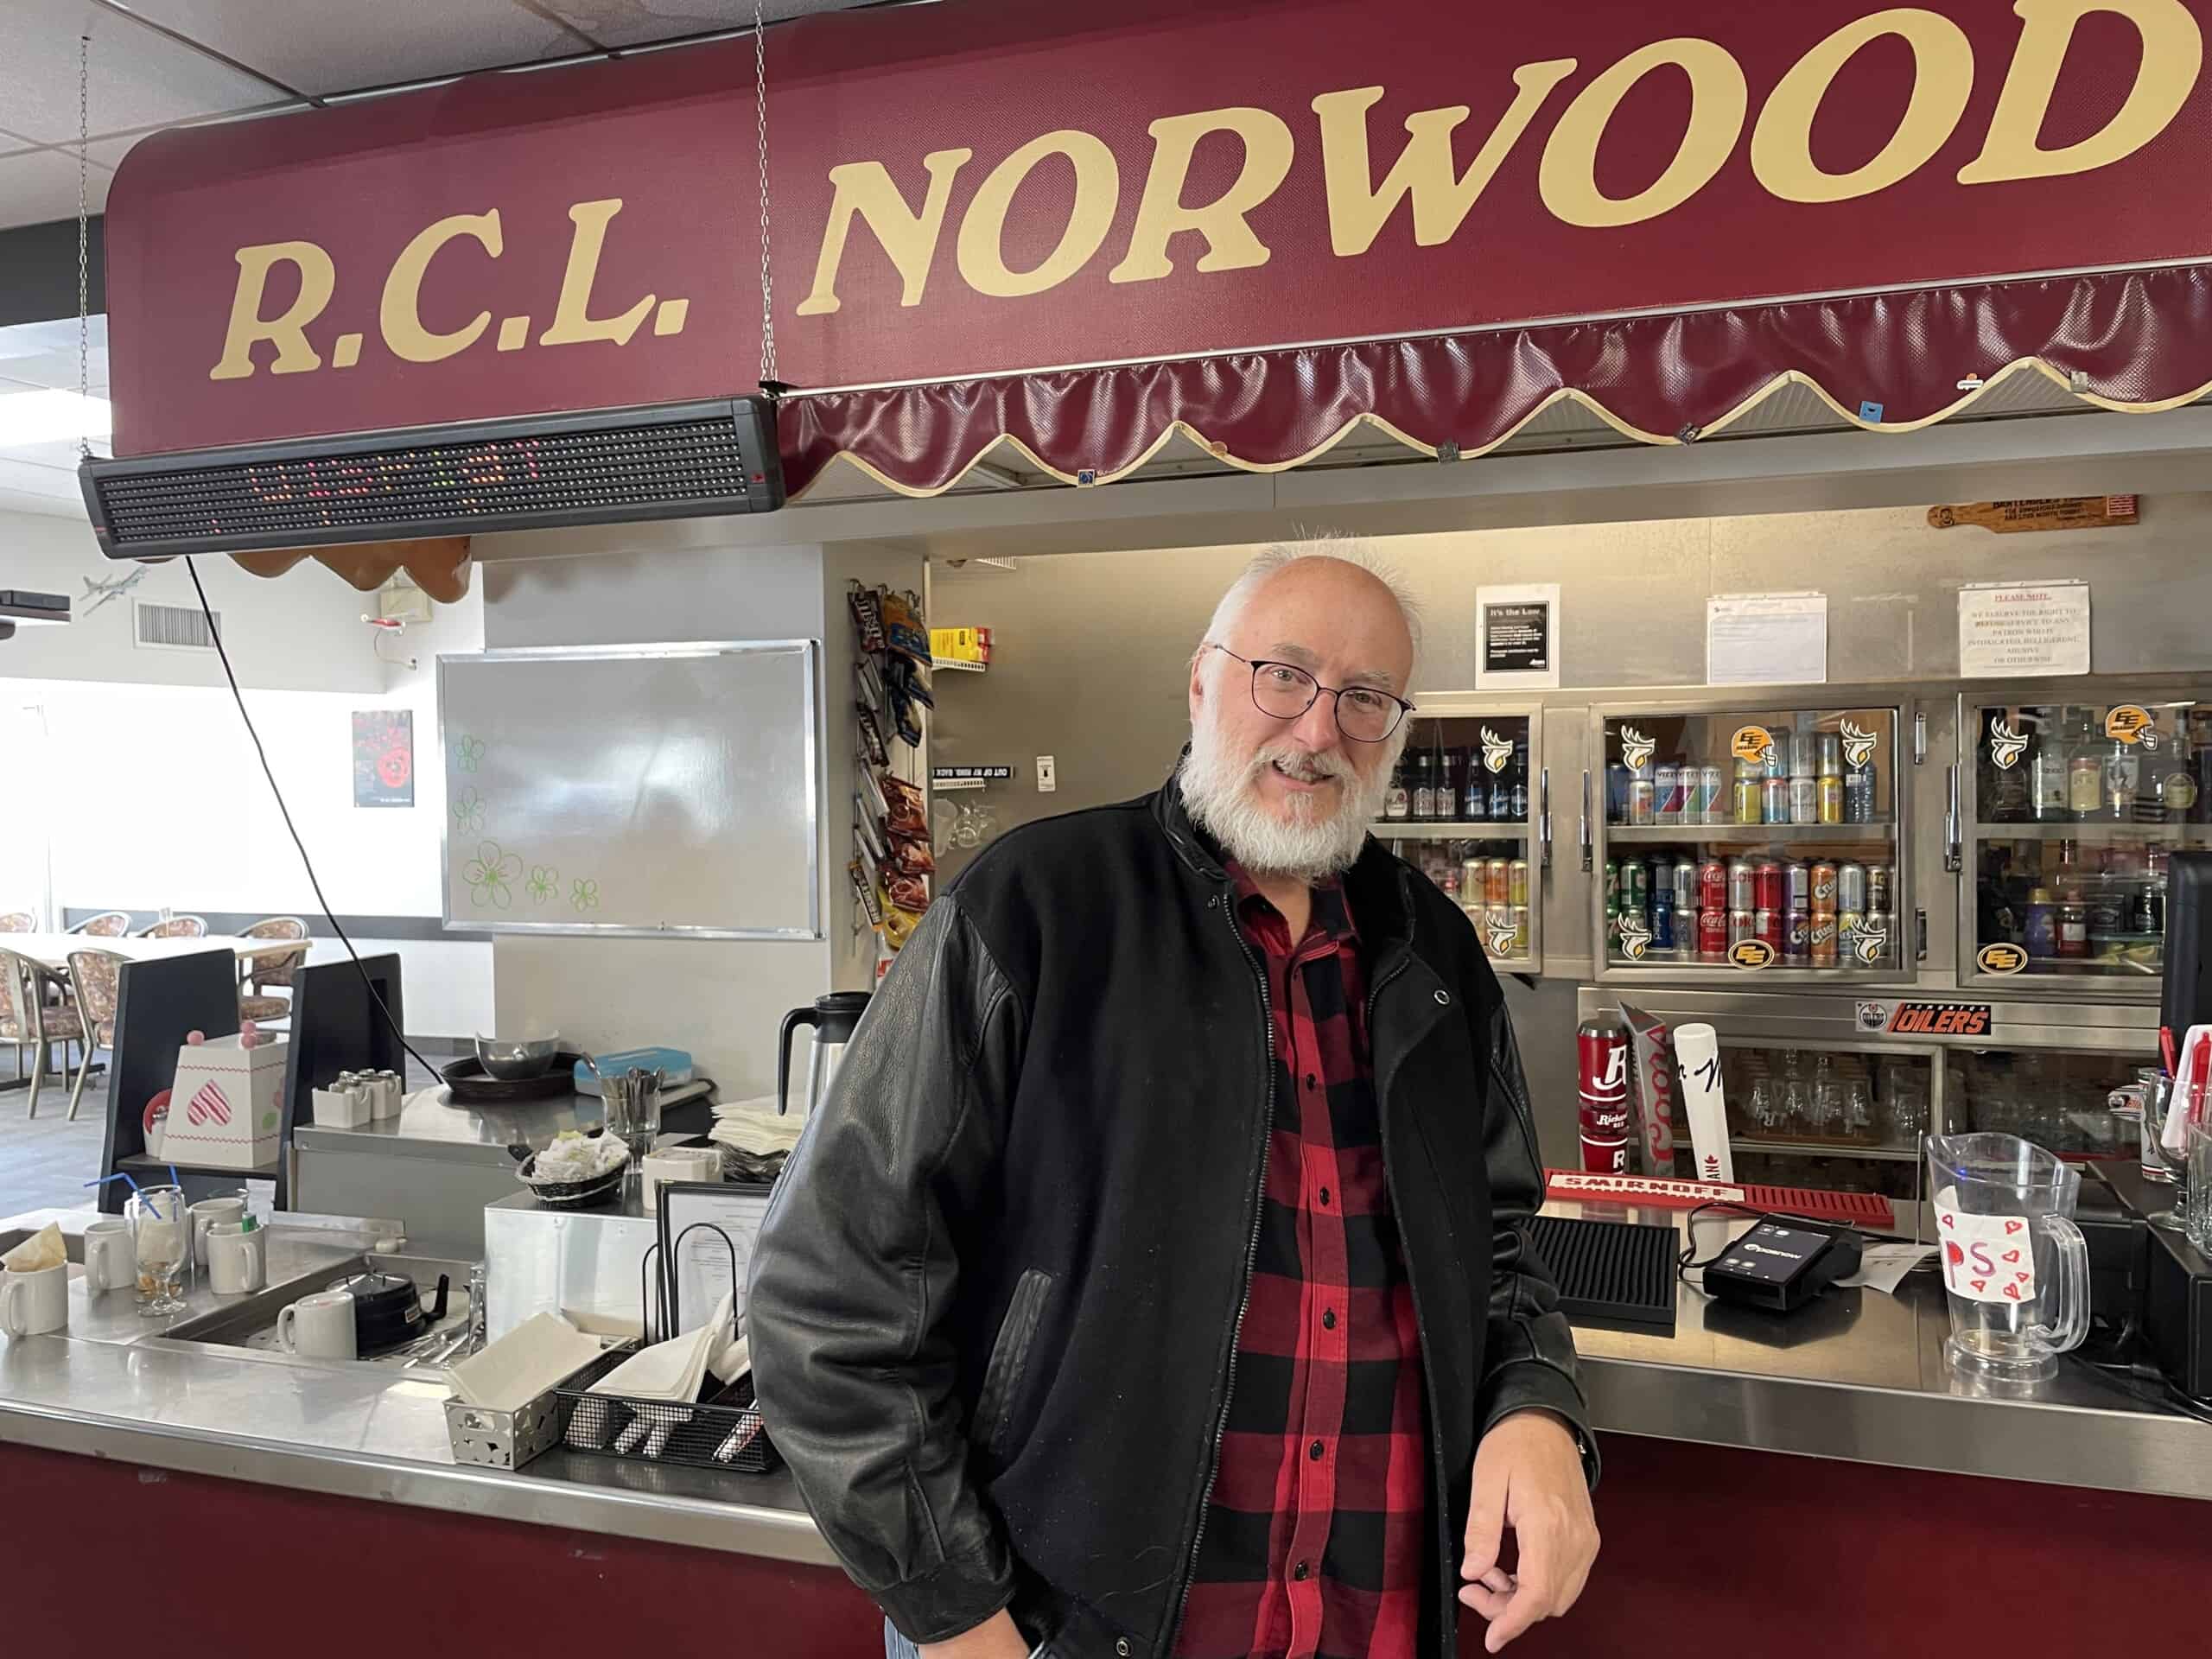 Norwood Legion is open for visitors